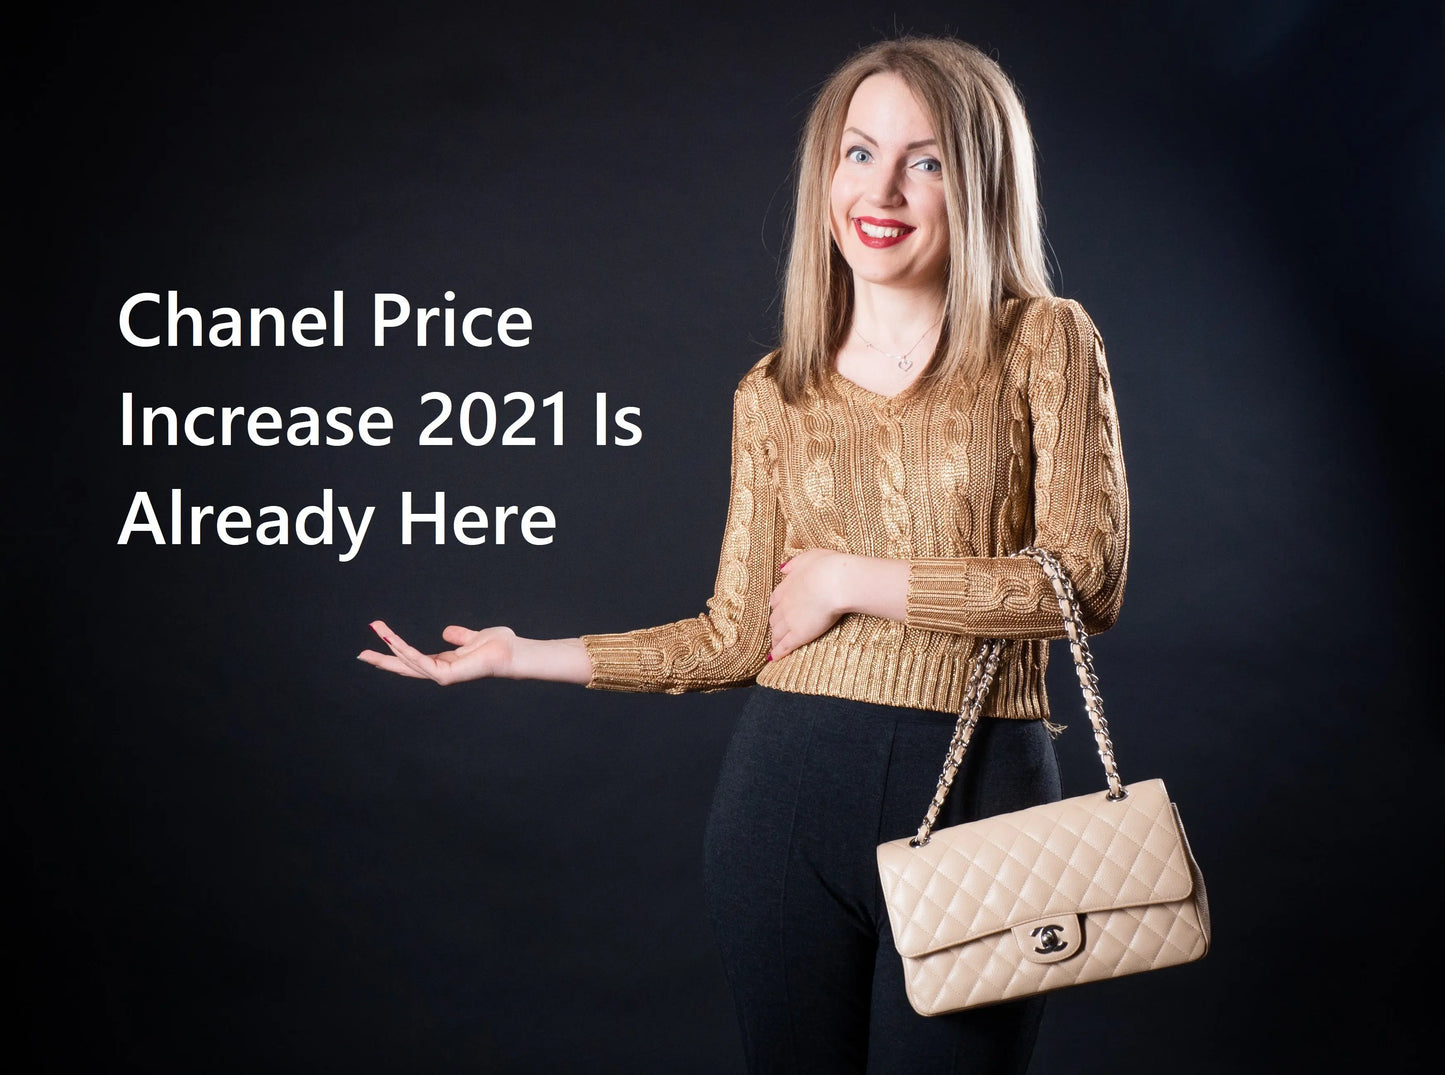 How Much Is Chanel Now After January 2021 Price Increase in the USA?